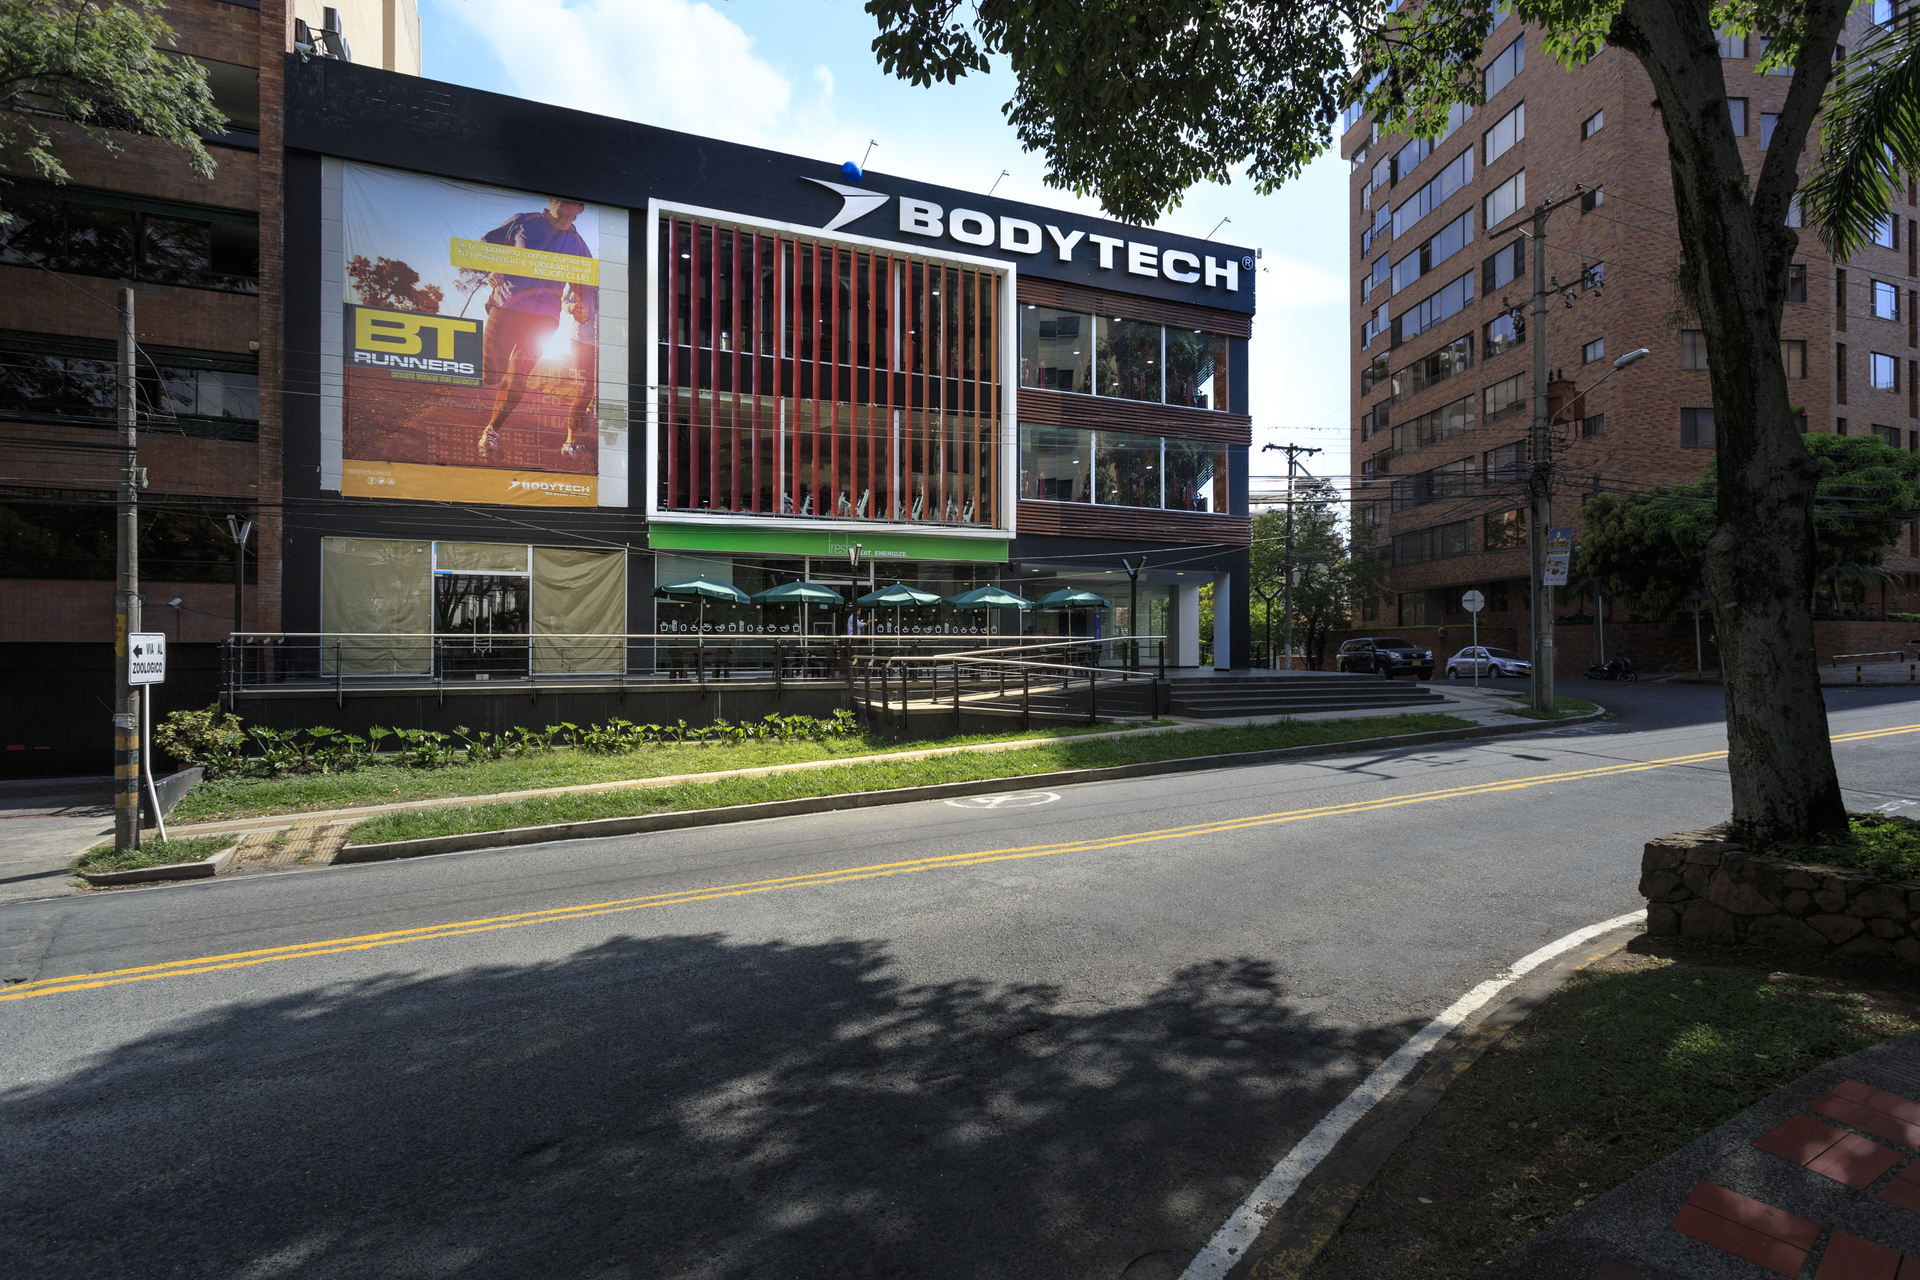 Bodytech Cali Oeste Real Estate Investment in Colombia